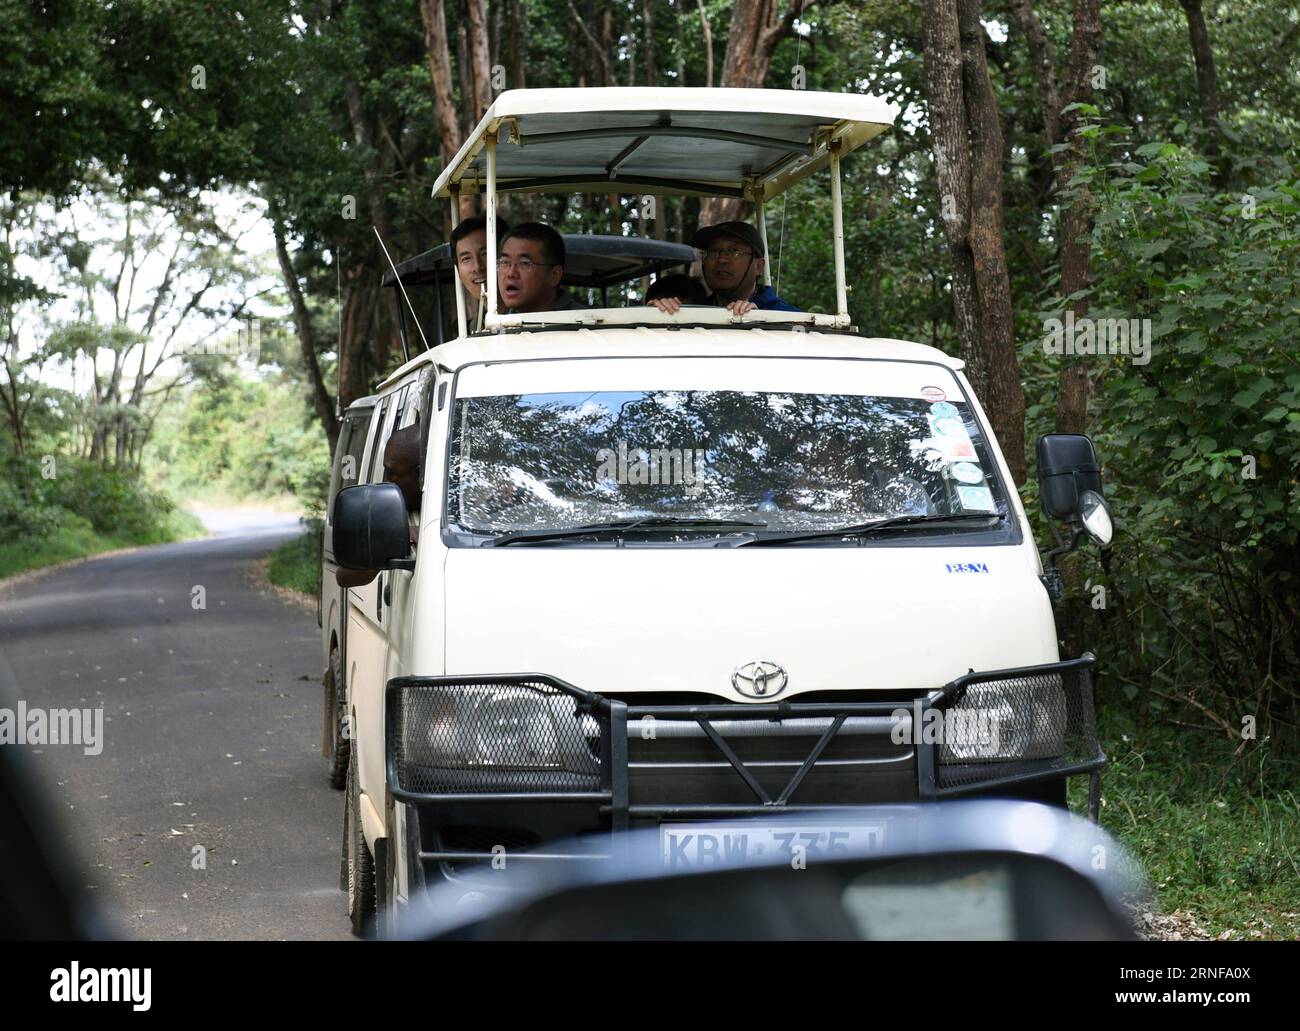 NAIROBI, July 26, 2016 -- Chinese tourists visit by van at the Nairobi National Park in Nairobi, capital of Kenya, July 26, 2016. Kenya has recorded minimal wildlife attacks on humans inside parks and game reserves thanks to solid measures that include enhanced vigilance and public outreach, an official said on Tuesday. ) (wjd) KENYA-NAIROBI-WILDLIFE ATTACK-PREVENTION LixBaishun PUBLICATIONxNOTxINxCHN   Nairobi July 26 2016 Chinese tourists Visit by van AT The Nairobi National Park in Nairobi Capital of Kenya July 26 2016 Kenya has Recorded Low Wildlife Attacks ON Humans Inside Parks and Game Stock Photo